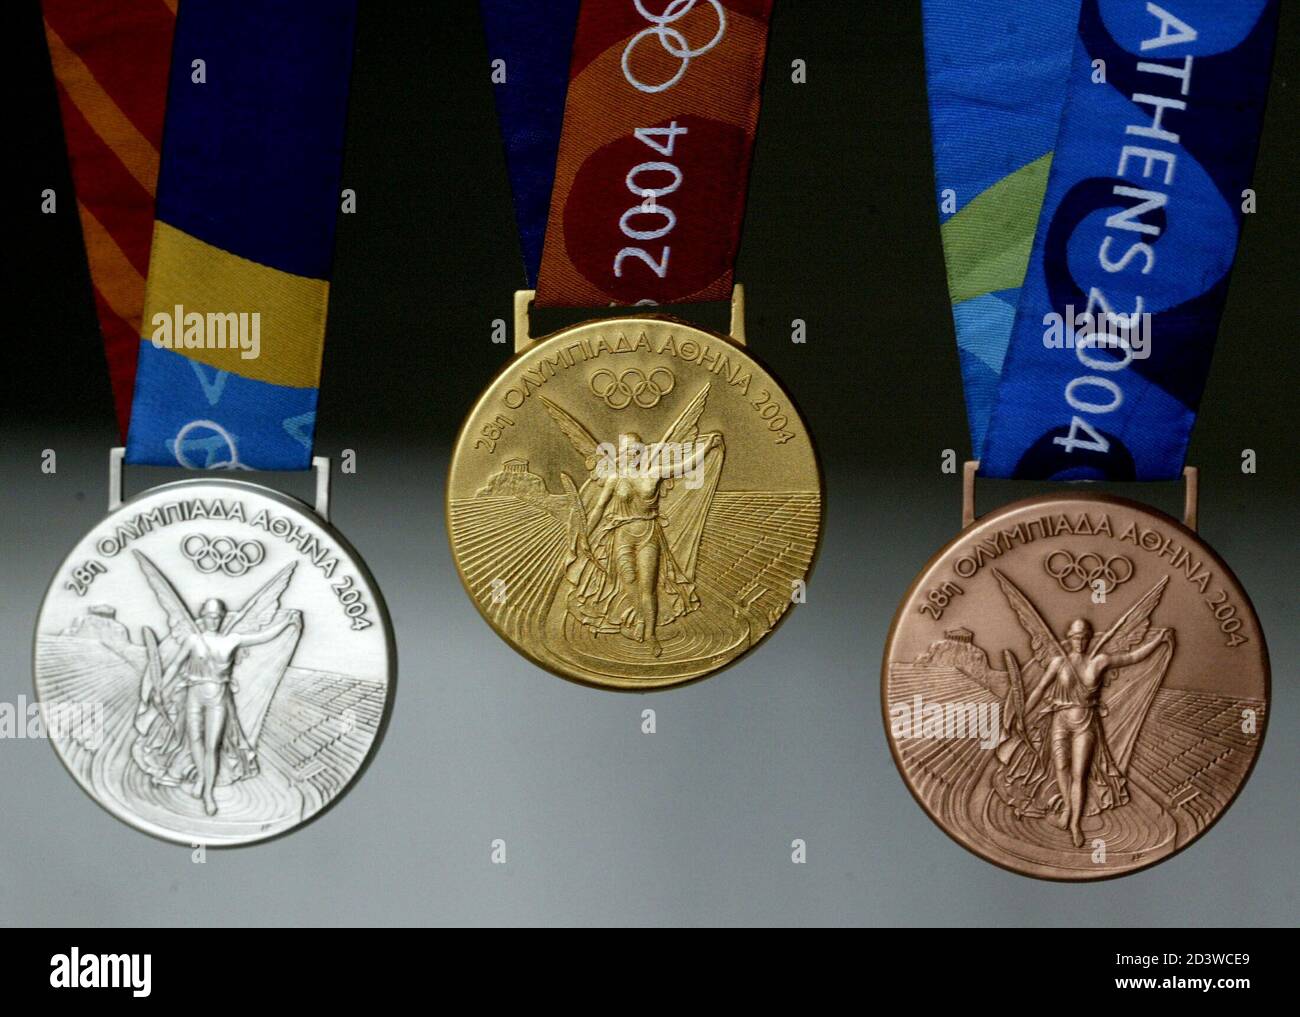 Goldmedaille Olympia Olympische Spiele Athen 2004 Olympia Medaille Olympiade 